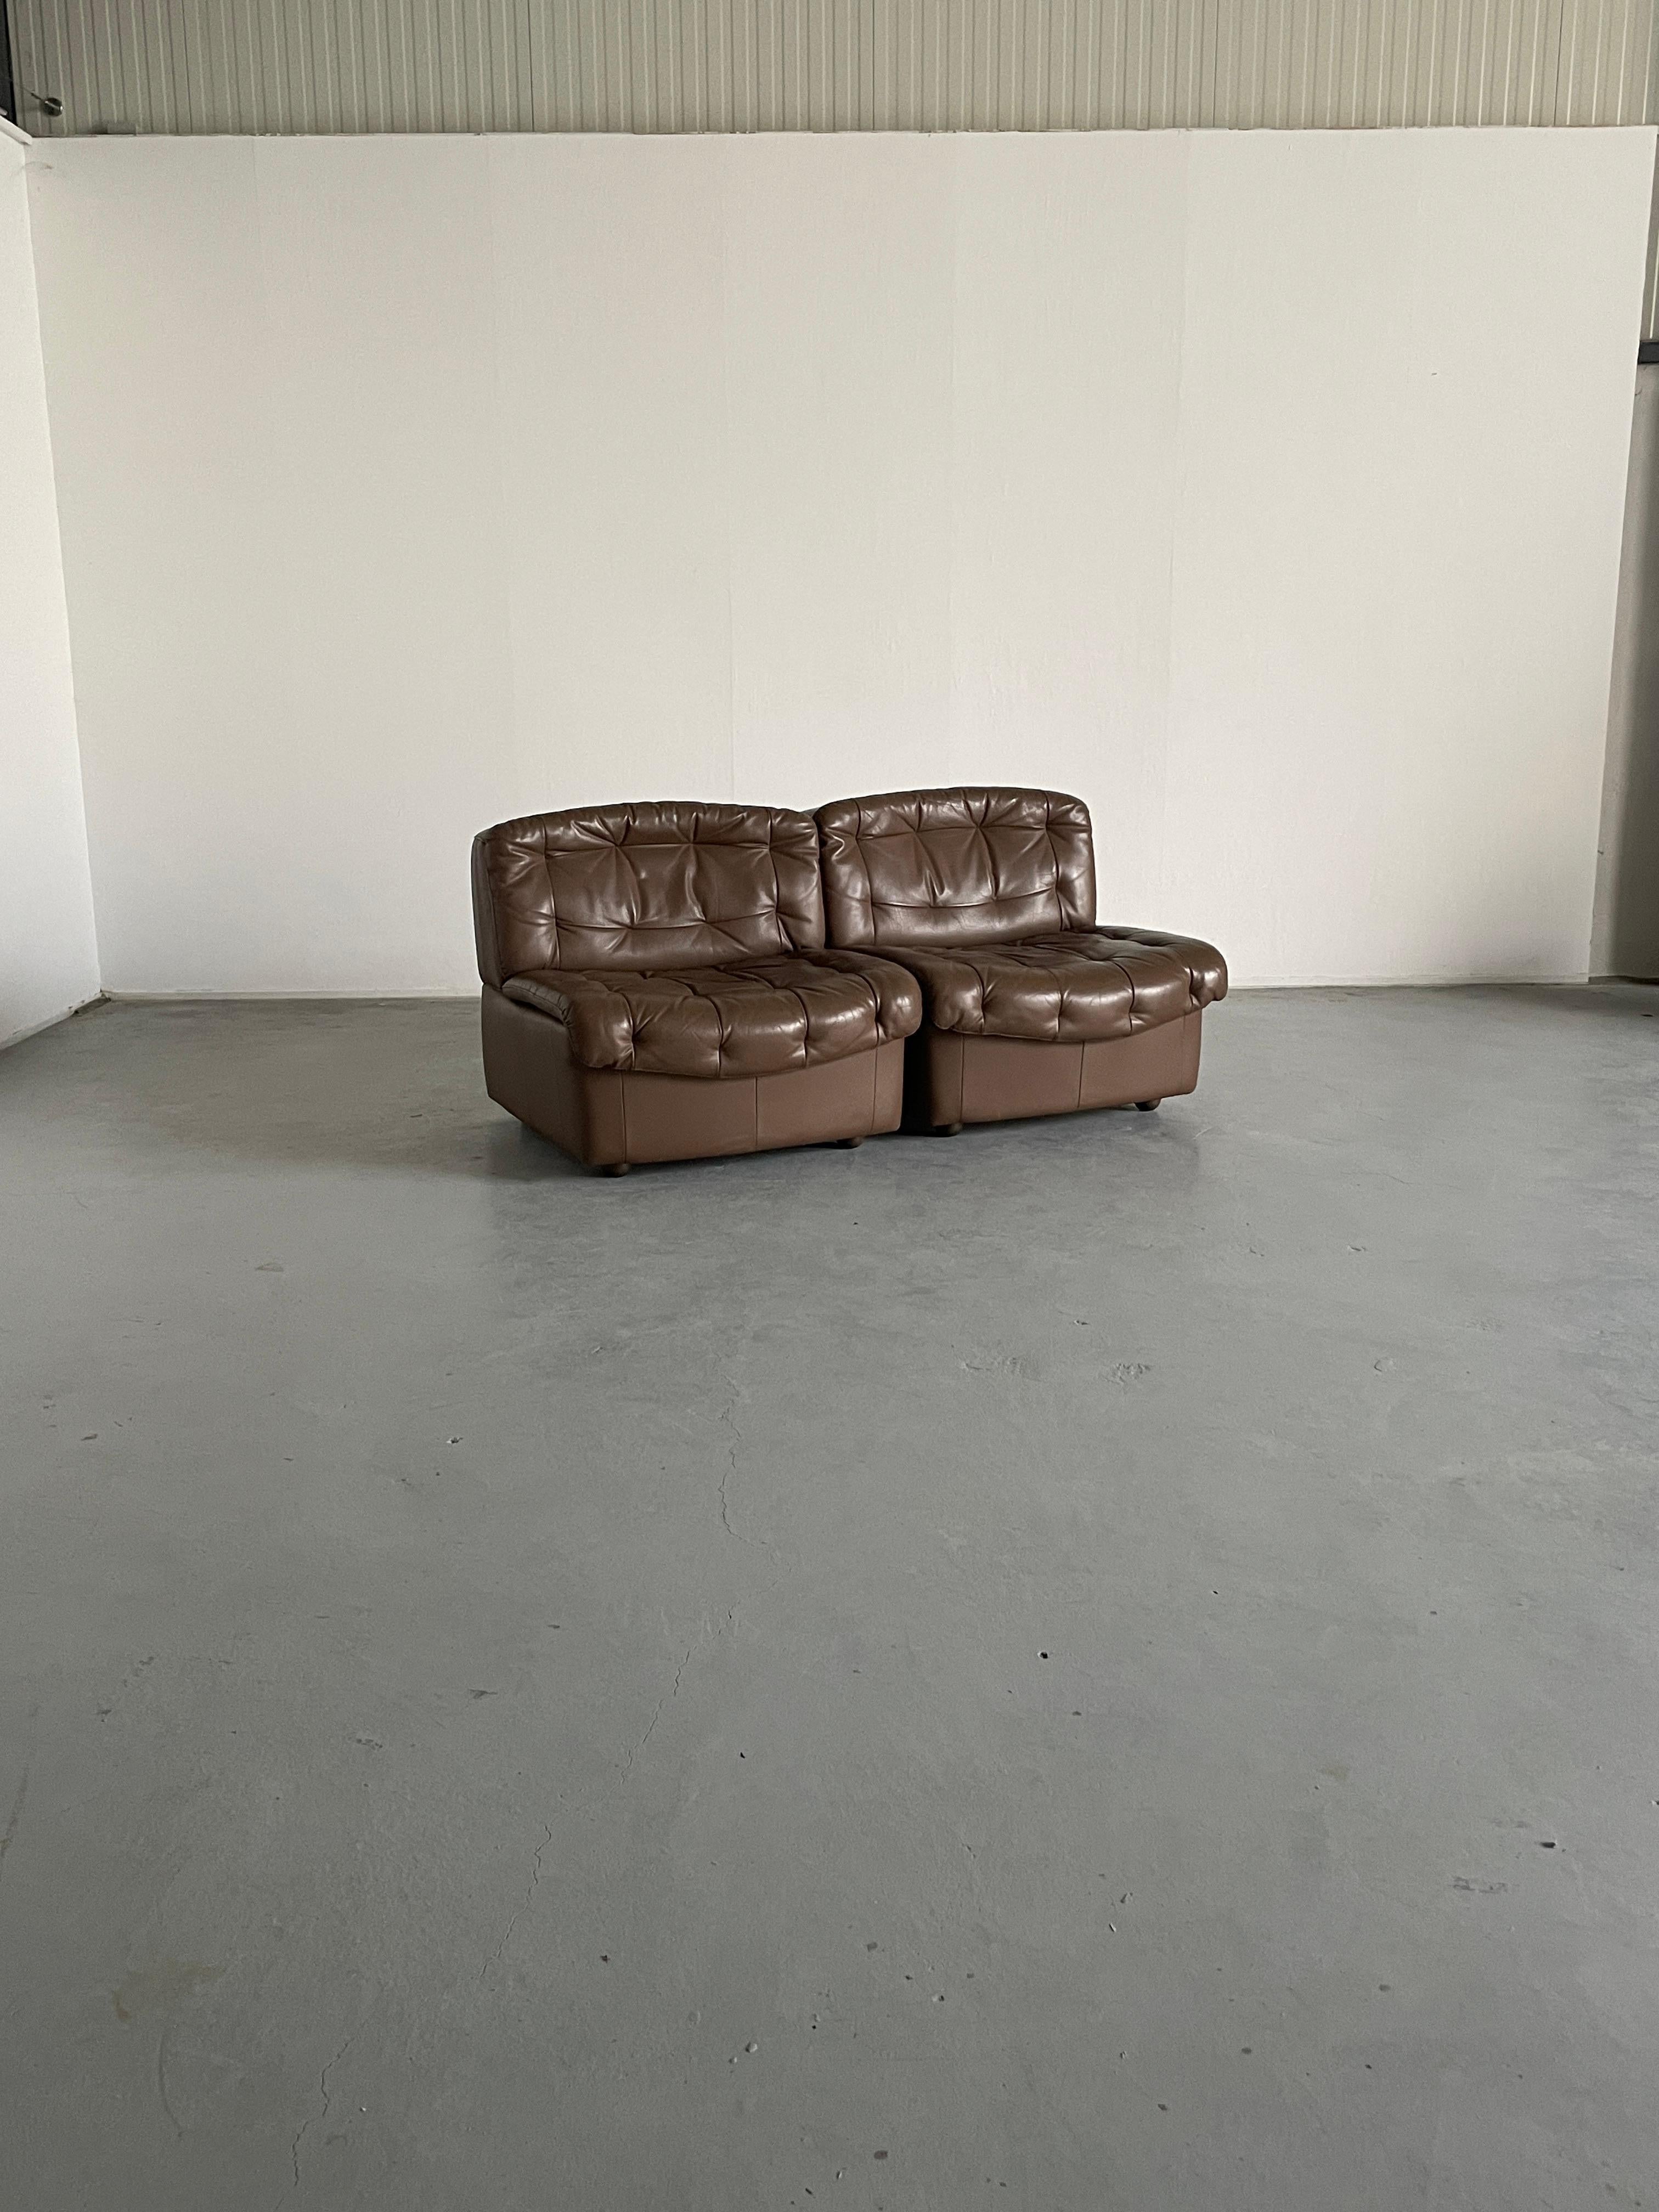 Pair of vintage Italian Mid-Century Modern leather lounge chairs or club chairs. 
Two individual modules.
Beautiful and unique shape and a quality 1970-1975 production.
In the style of De Sede DS-11 modular sofa.

Overall very well preserved and in